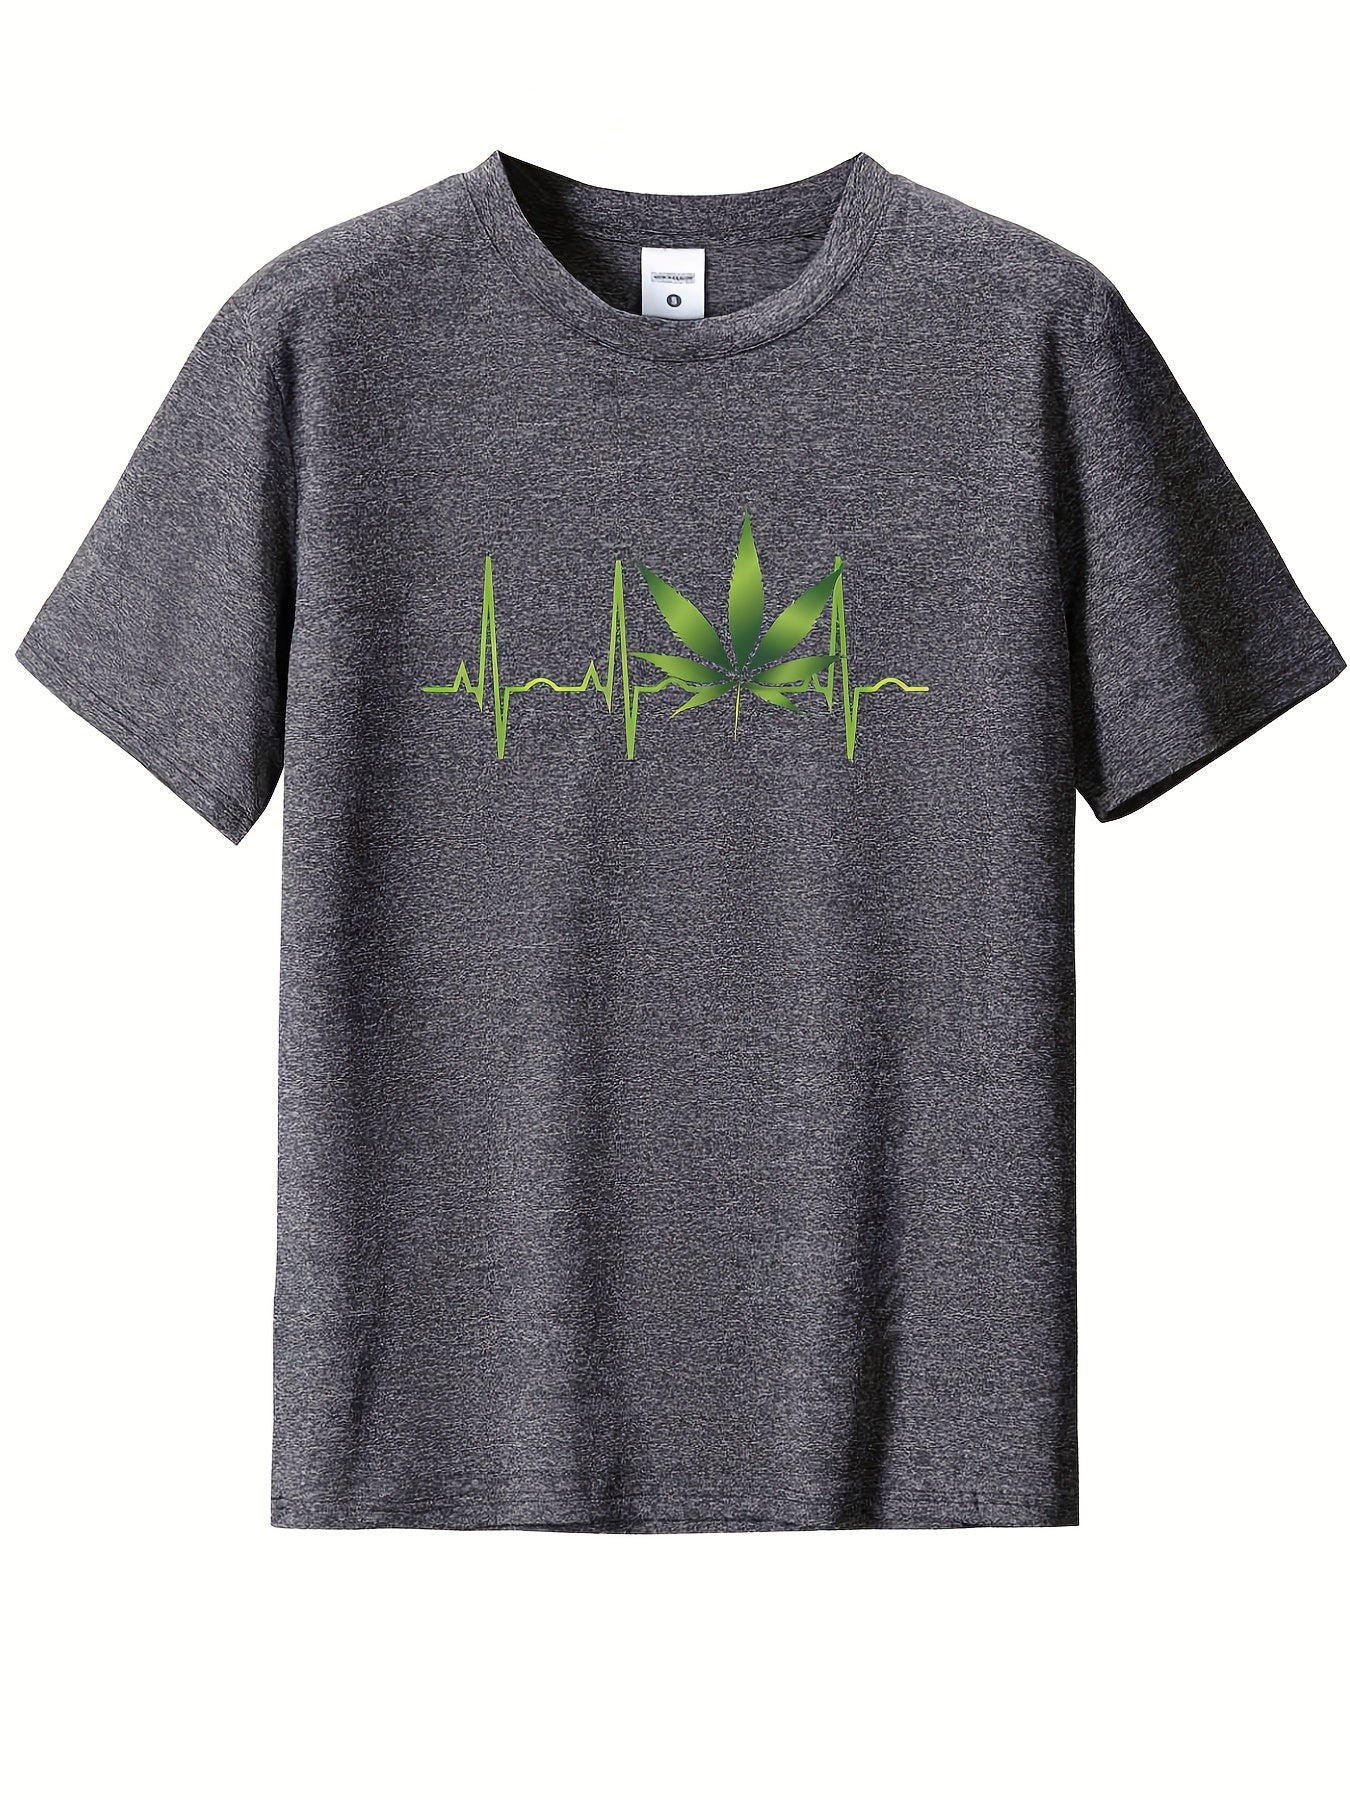 Heart Beat And Leaf Print, Breathability, Summer Round Neck ,Men's Short-sleeve T-shirt, Casual Wear, Men's Clothing